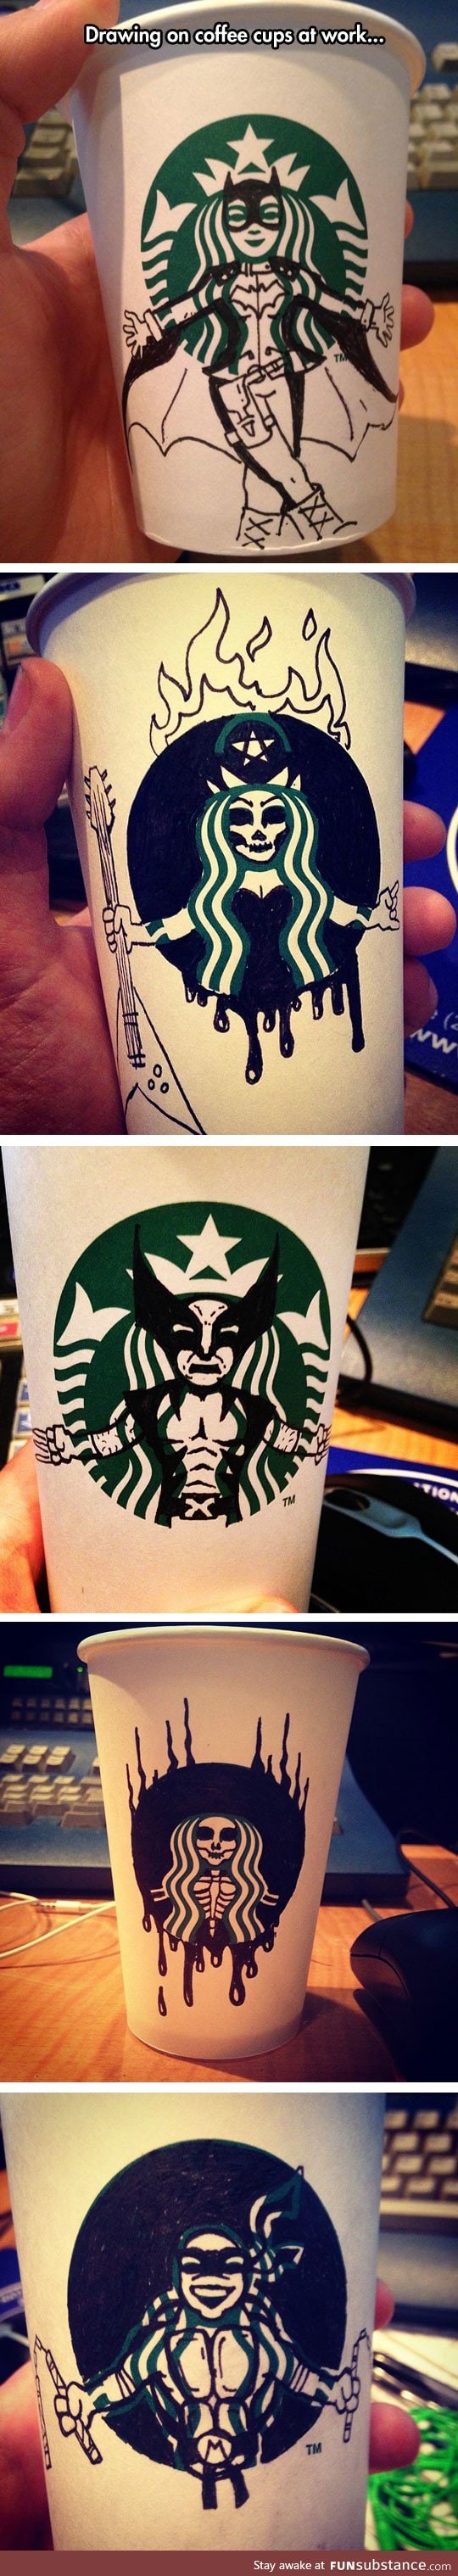 Starbucks should pay him for these awesome designs